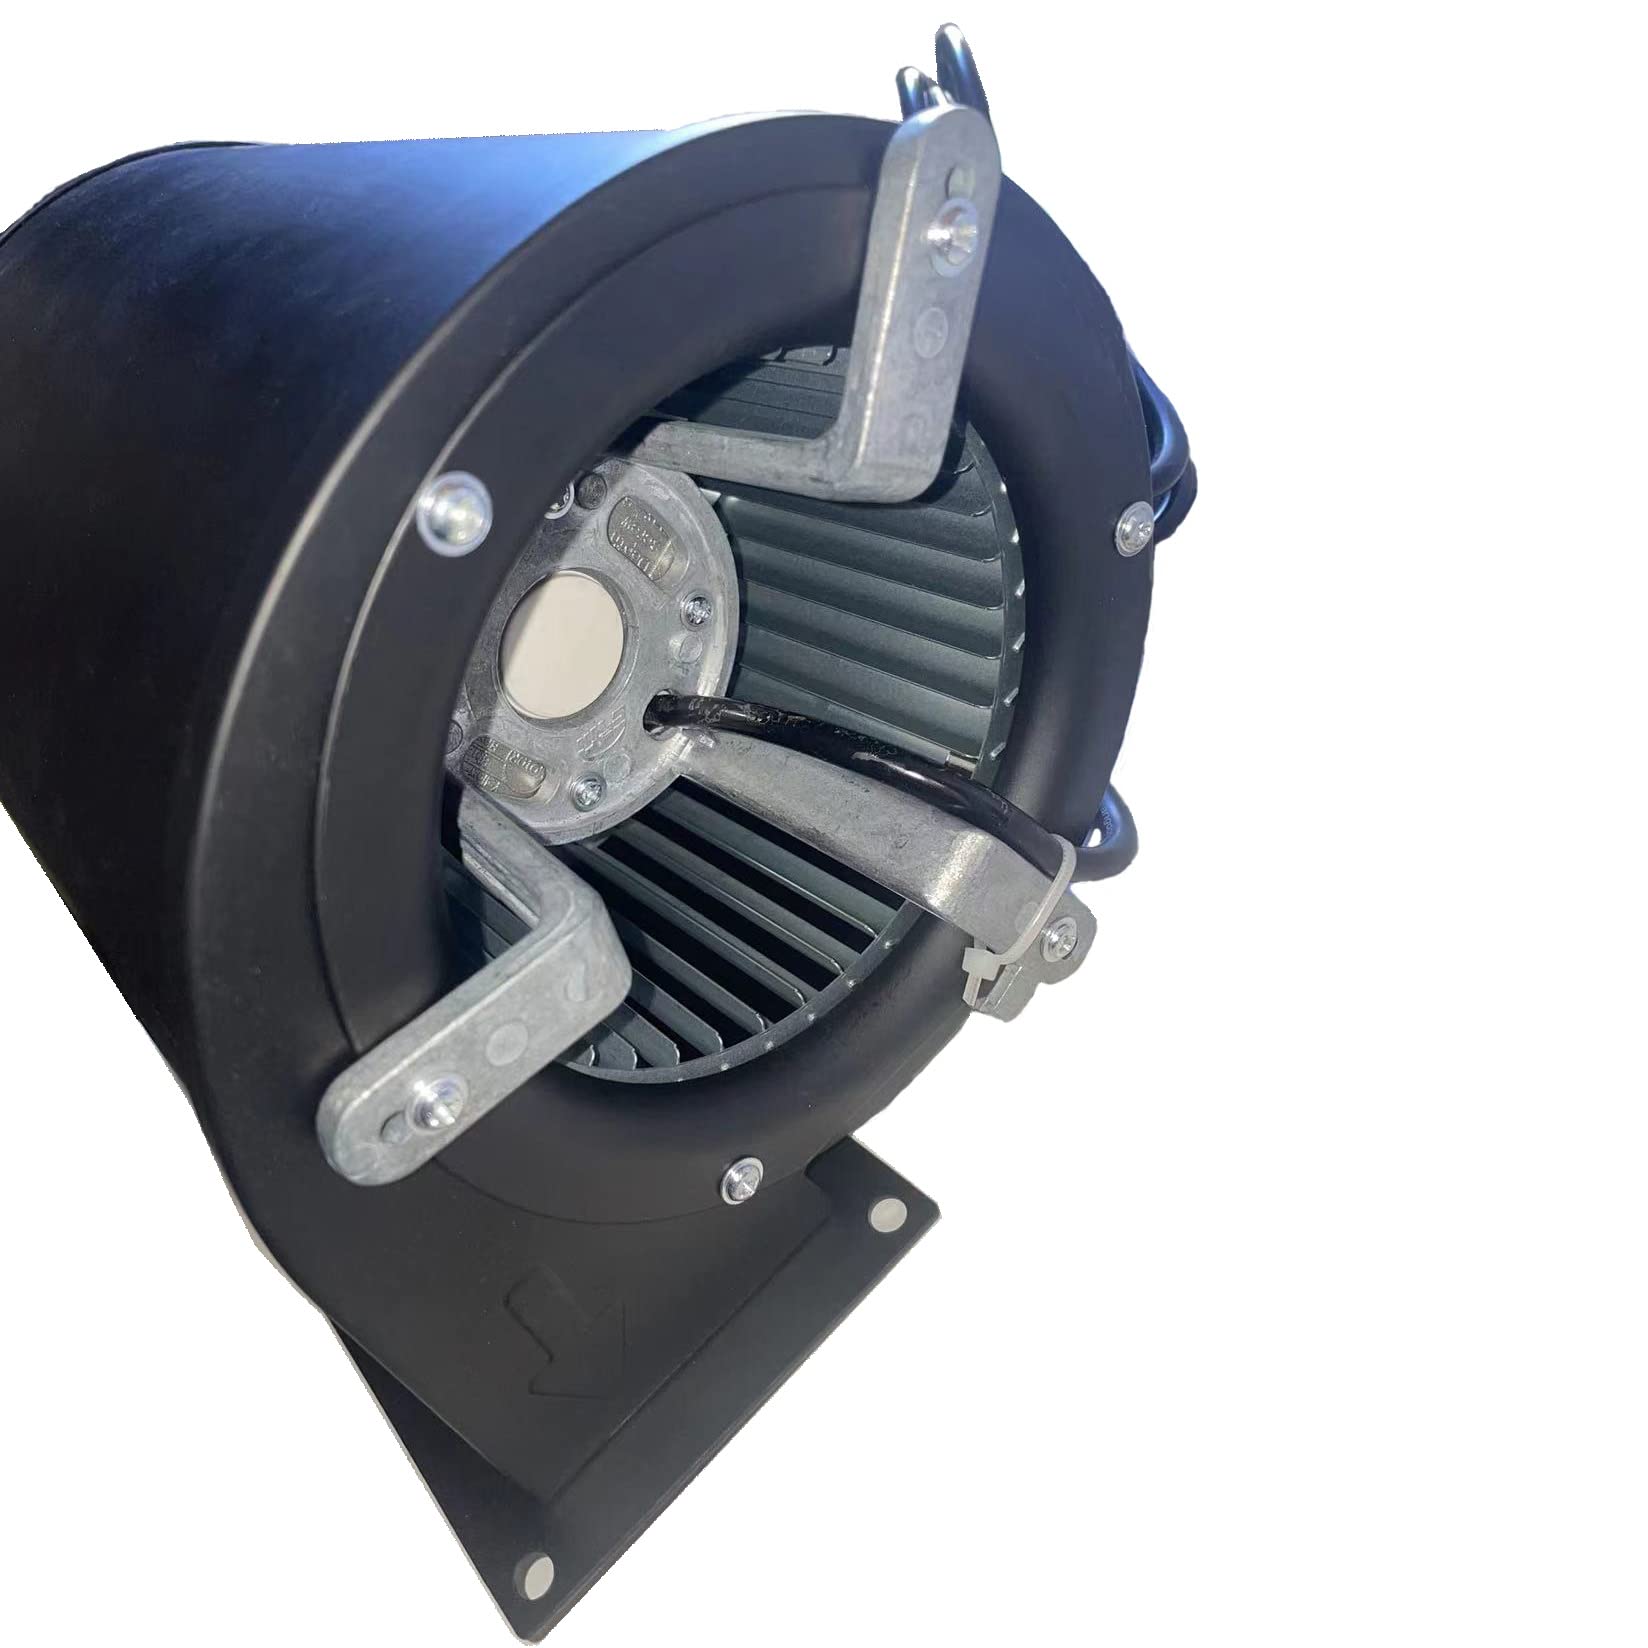 Hakka Centrifugal Blower, Rectangular Shaded Pole Specialty Blower with Flange, 500 CFM, 3300 RPM, 110V/60Hz, 1.5 amps